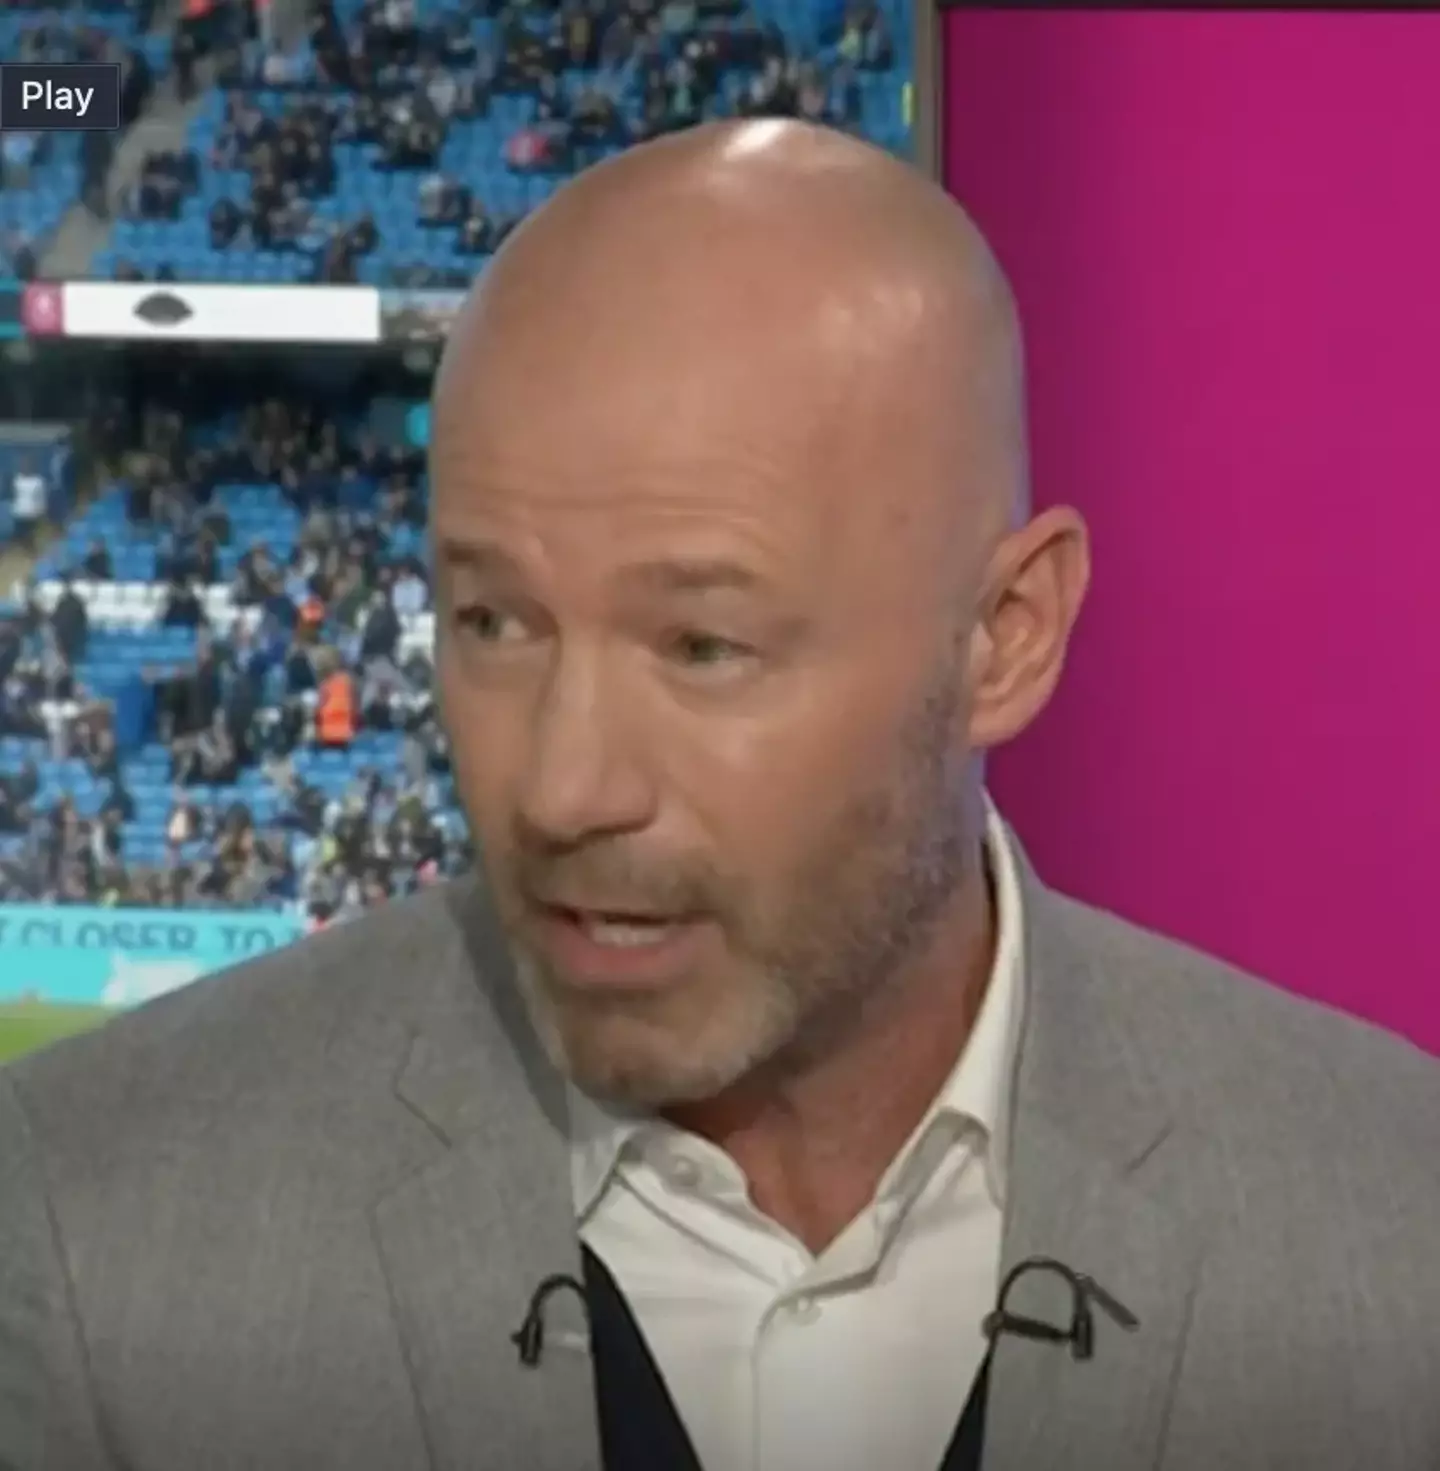 Shearer took time to apologise to the audience during tonight's show.